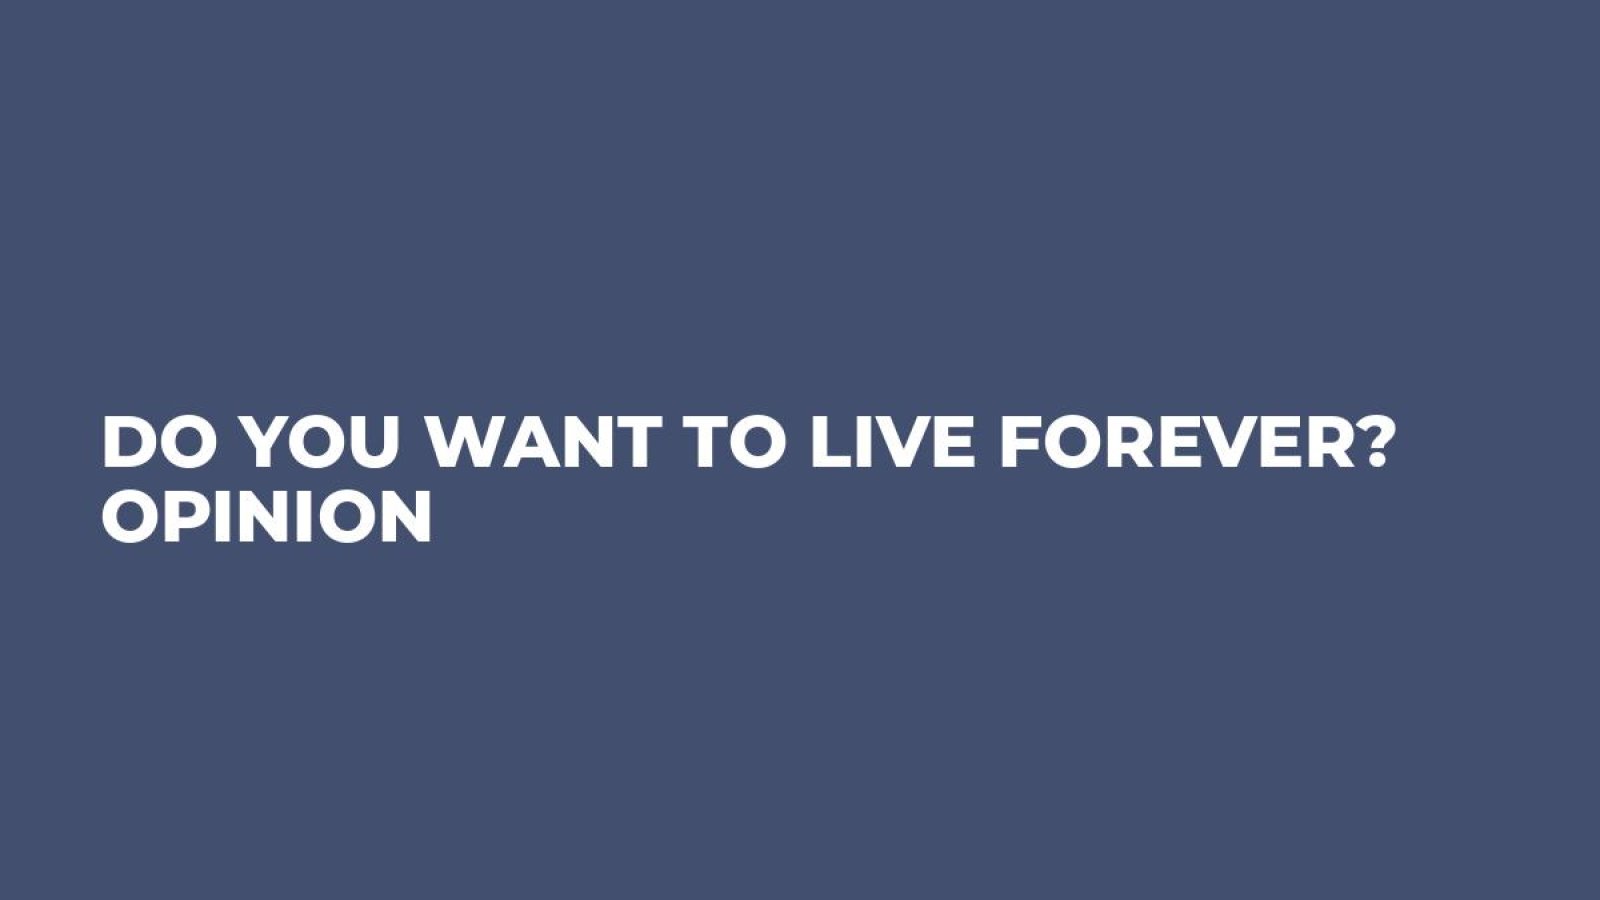 Do you want to live forever? Opinion